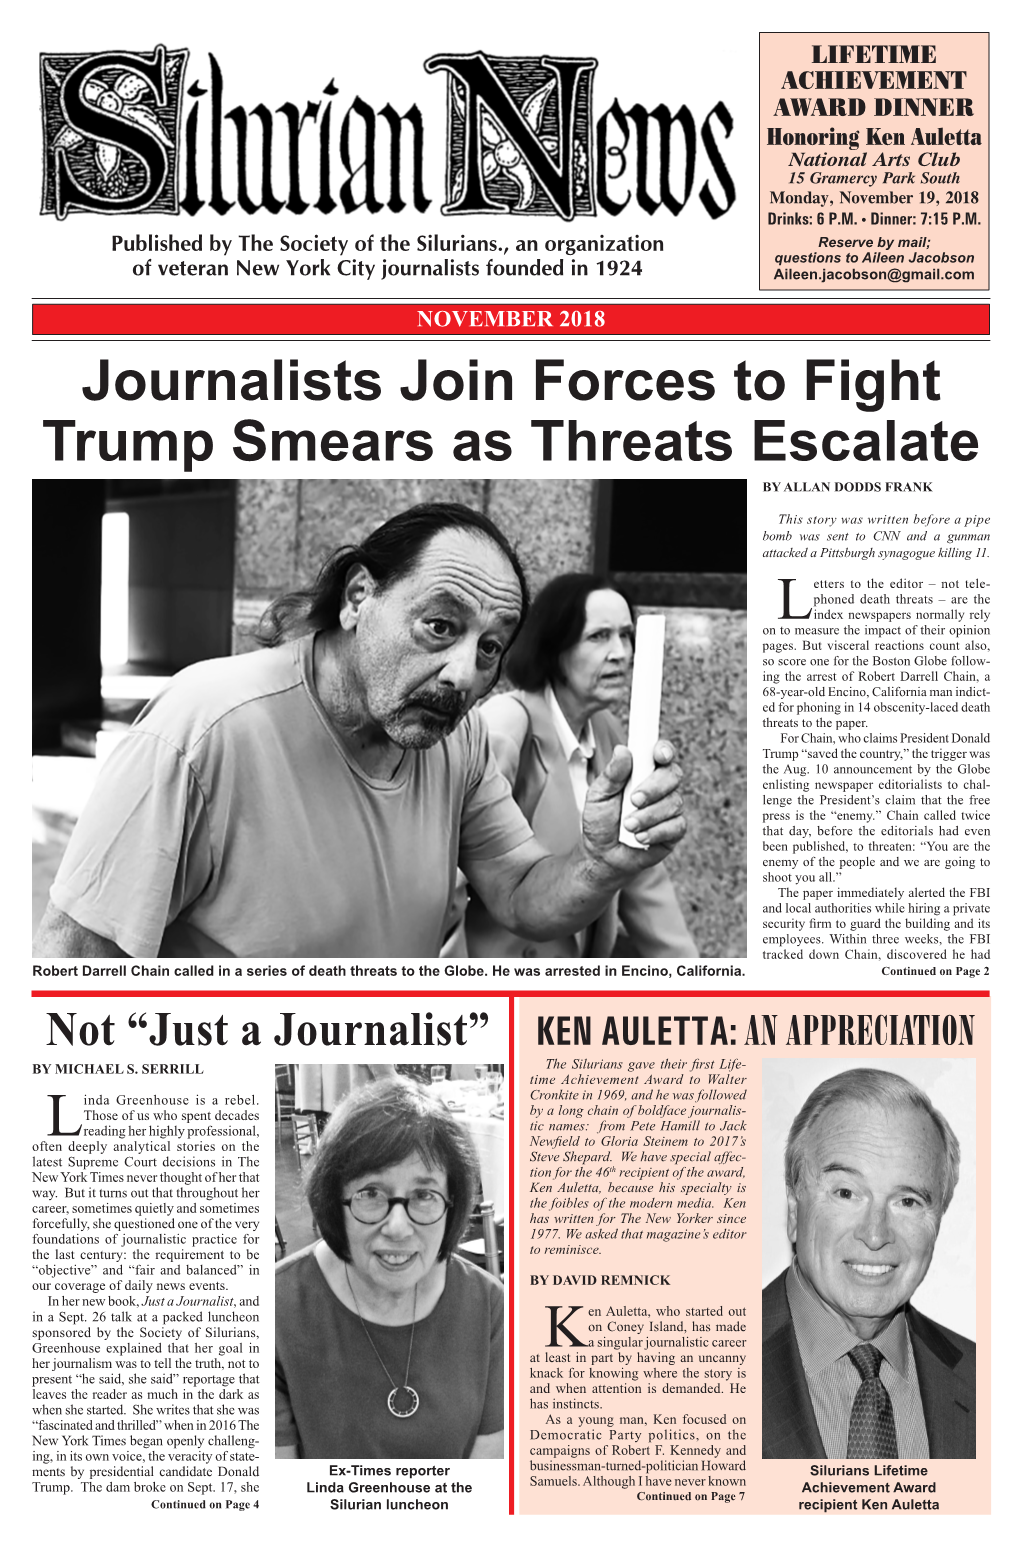 Journalists Join Forces to Fight Trump Smears As Threats Escalate by ALLAN DODDS FRANK